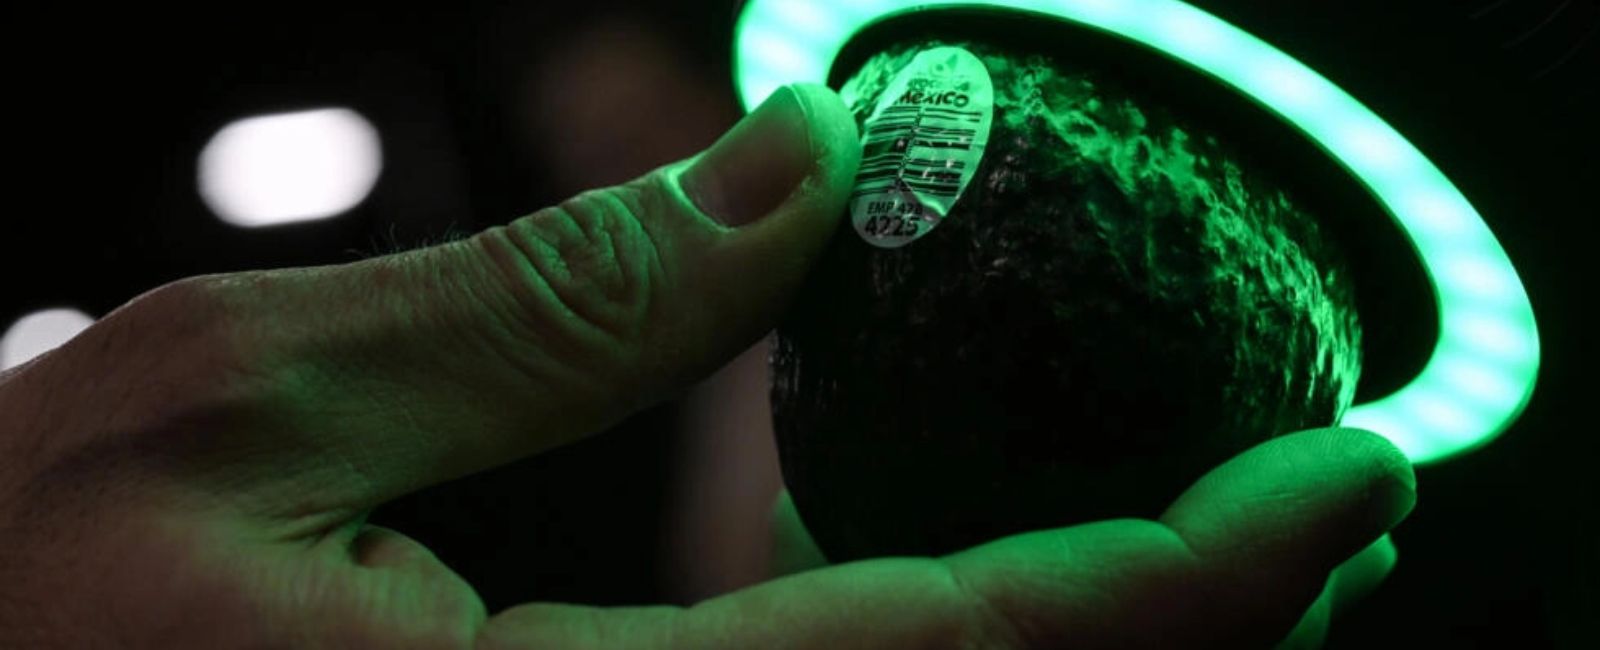 Scanners for avocados and your brain: Highlights from CES 2023